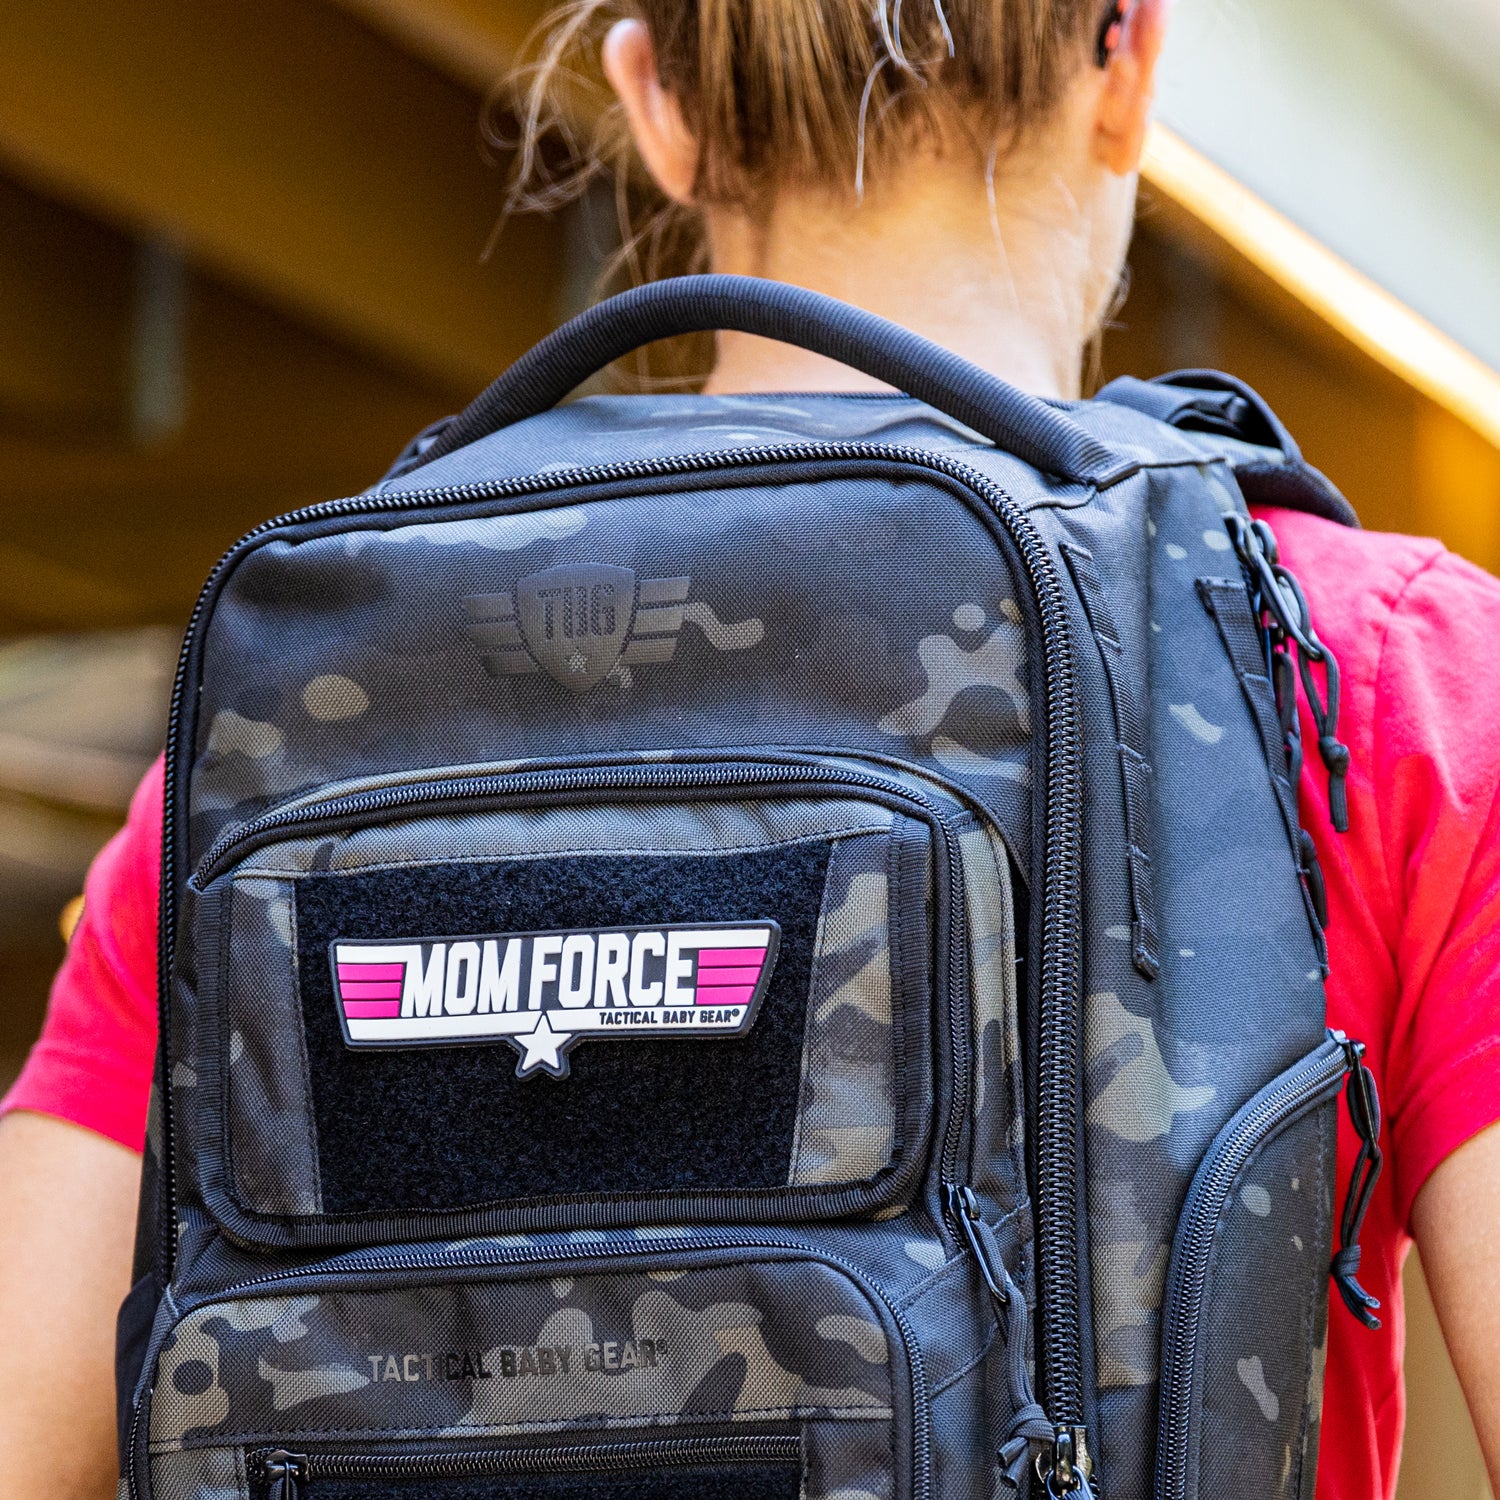 Mom Force patch on black camo backpack worn by white woman. 